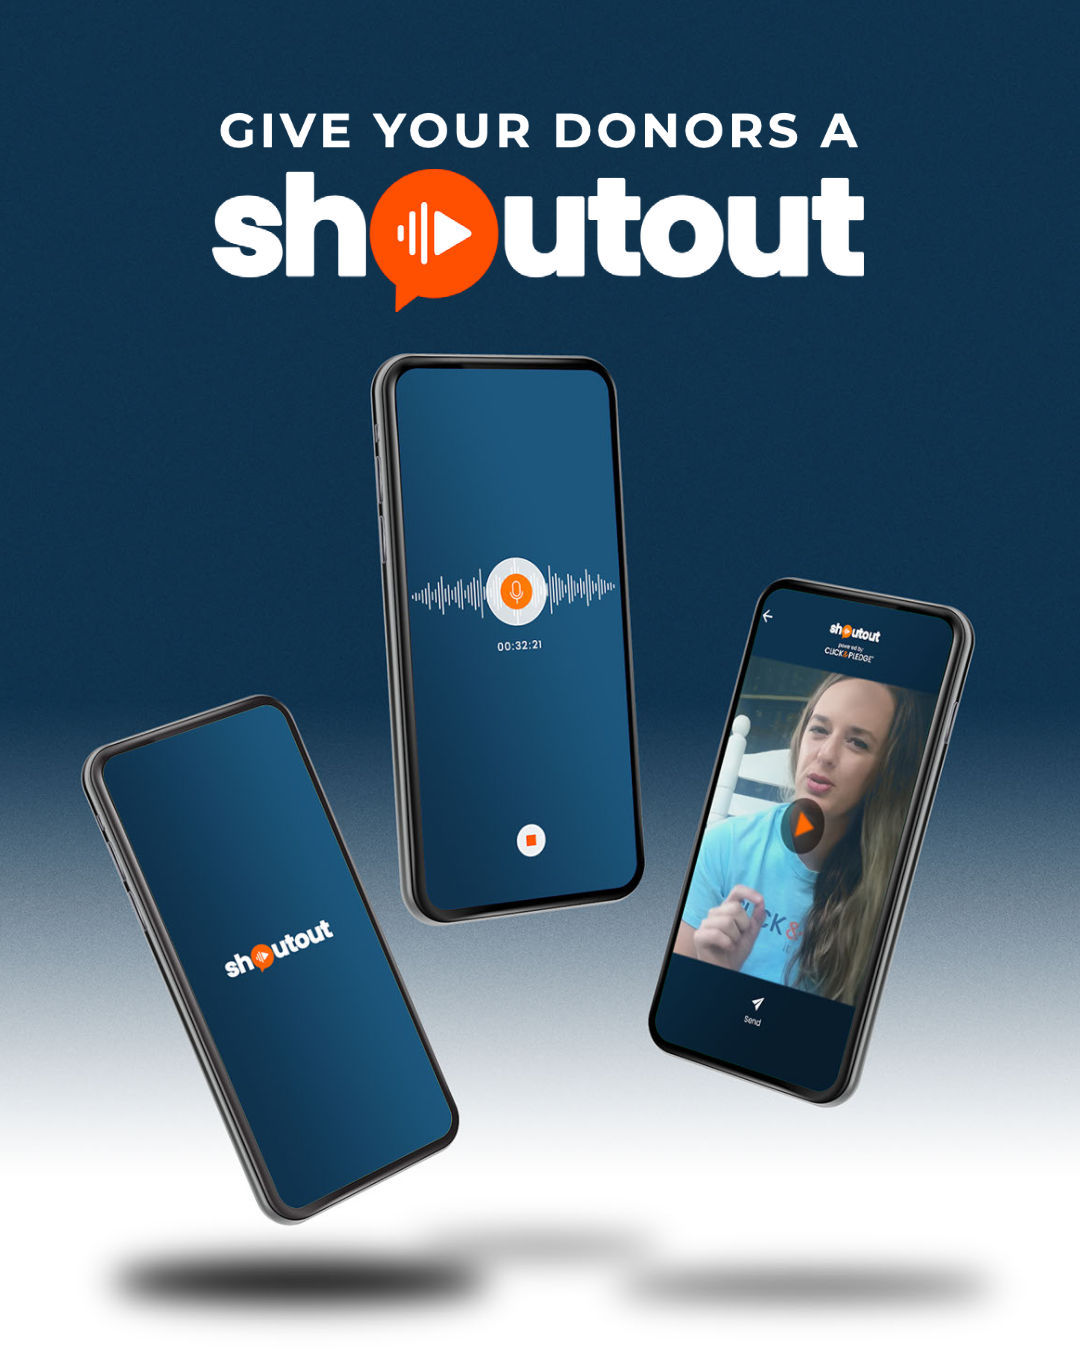 Shoutout - donor outreach tool